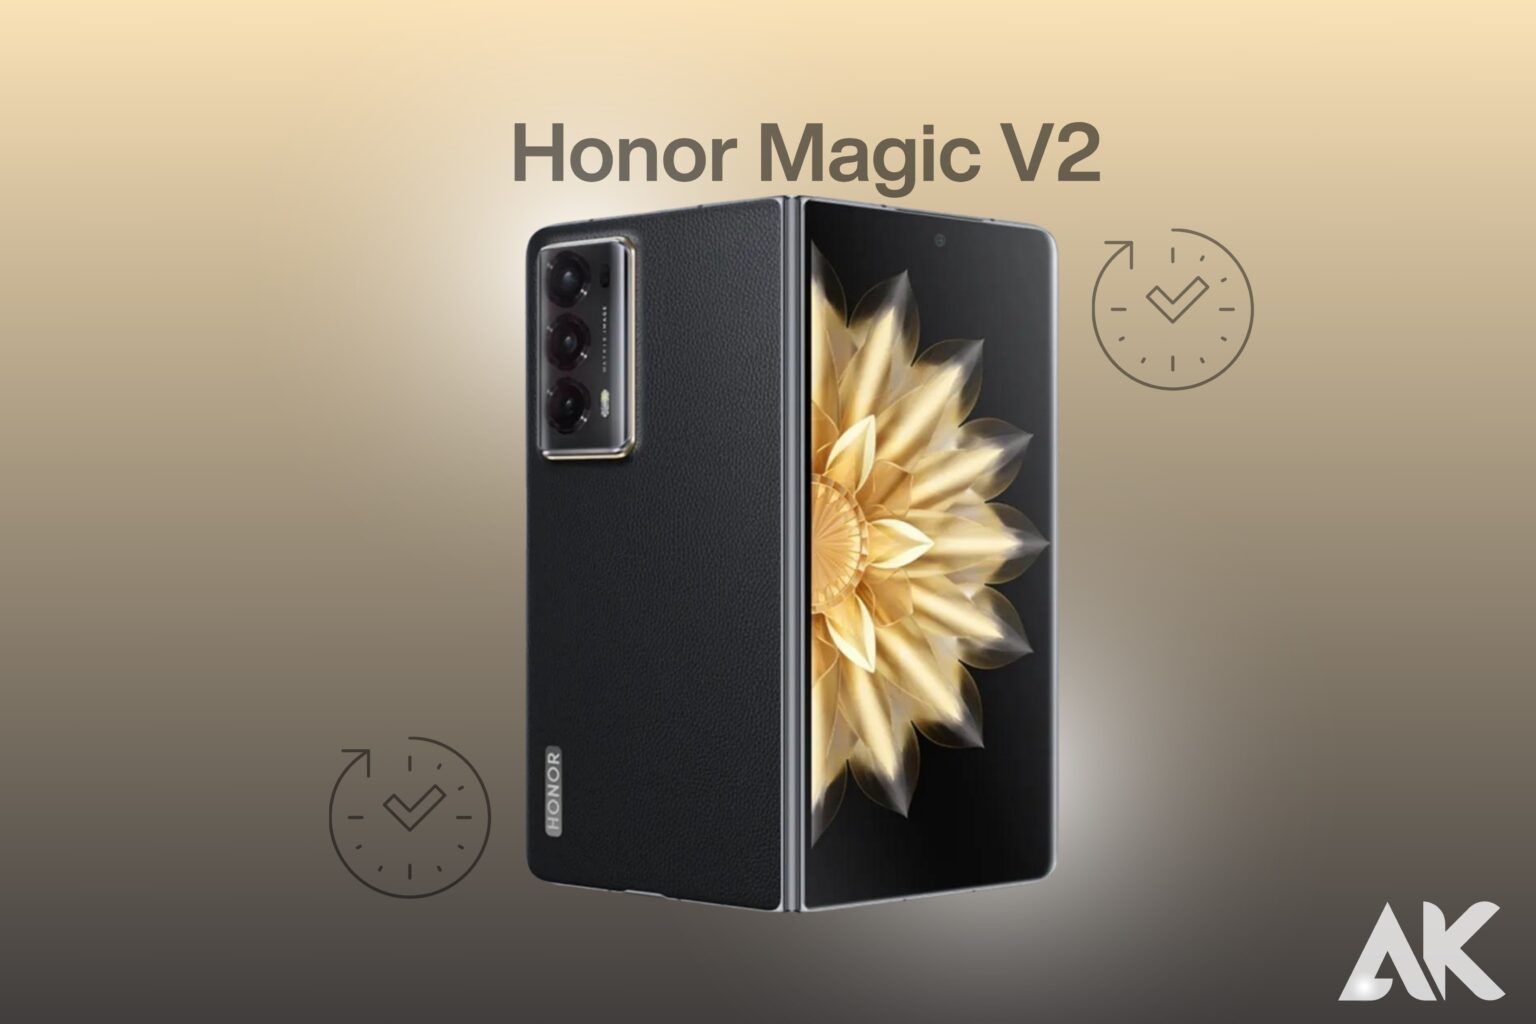 I tested the Honor Magic V2 and it blew my mind